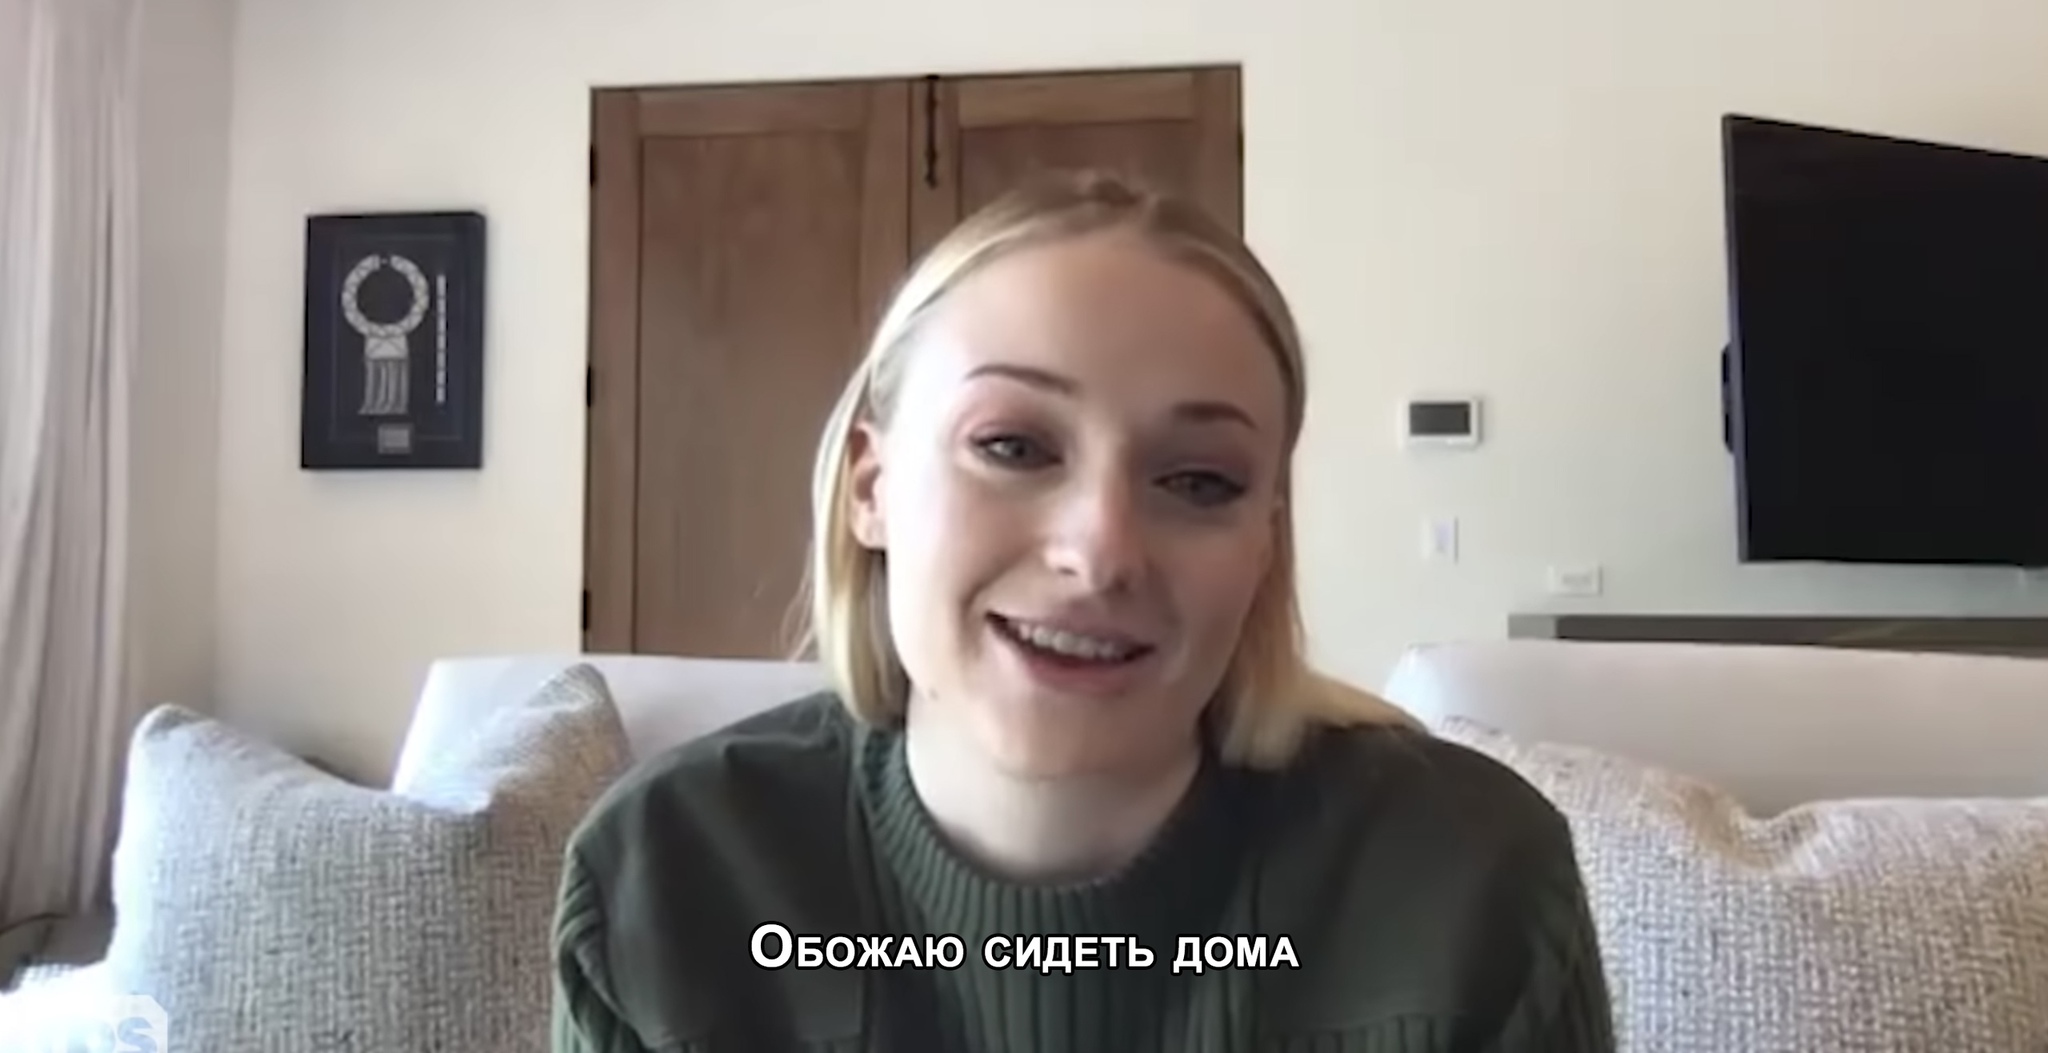 We are all a little Sophie Turner - Sophie Turner, Actors and actresses, Celebrities, Storyboard, Conan Obrien, Self-isolation, Quarantine, Longpost